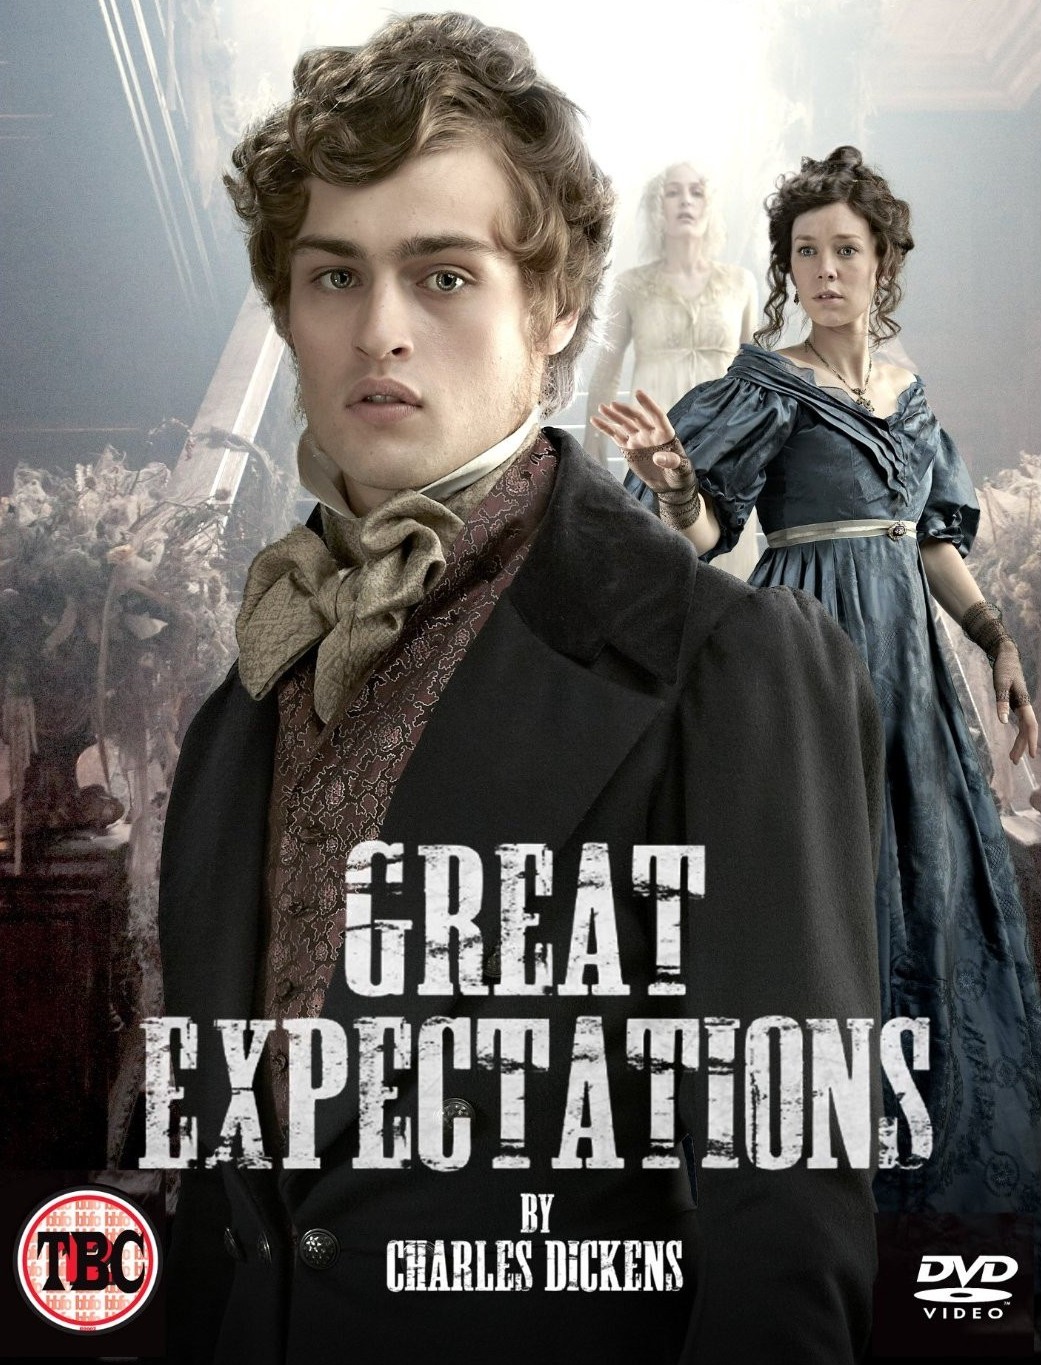 Great Expectations 2011